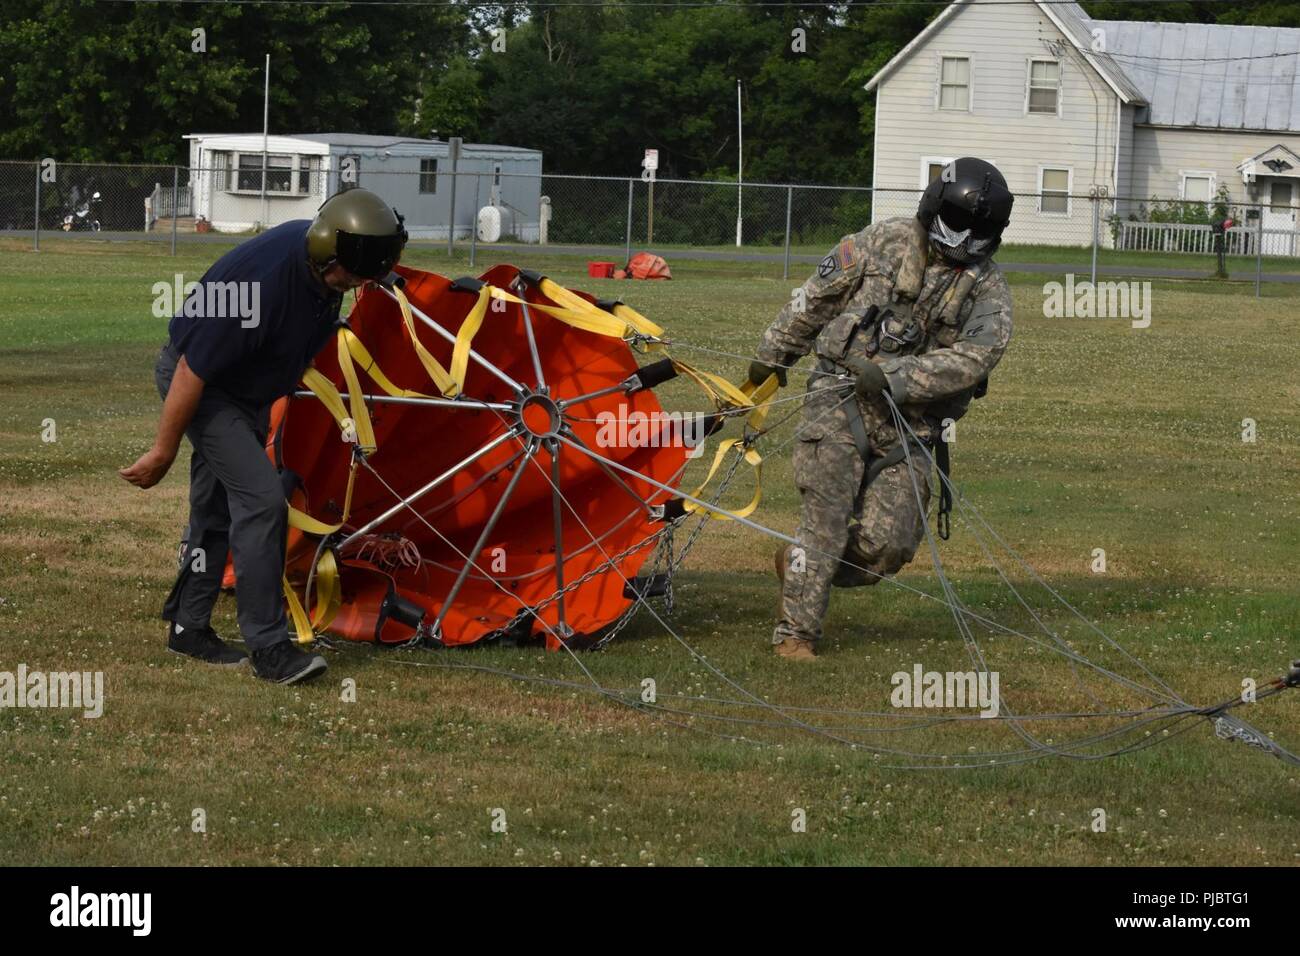 New York Army National Guard Staff Sgt. Jimmy Rose(right), assigned to 3rd Battalion, 142nd Aviation , and civilian Steven Rosen, load a Bambi bucket onto a UH-60 Blackhawk Helicopter in Altona , N.Y., July, 13, 2018. Two UH-60 aircrews  responded to a forest fire that broke out in Altona, N.Y., and spread across five hundred of acres, from July 13-15.  Army Guard aircrews flew more missions in support of fire fighters on July 15. (N.Y. Army National Guard Stock Photo